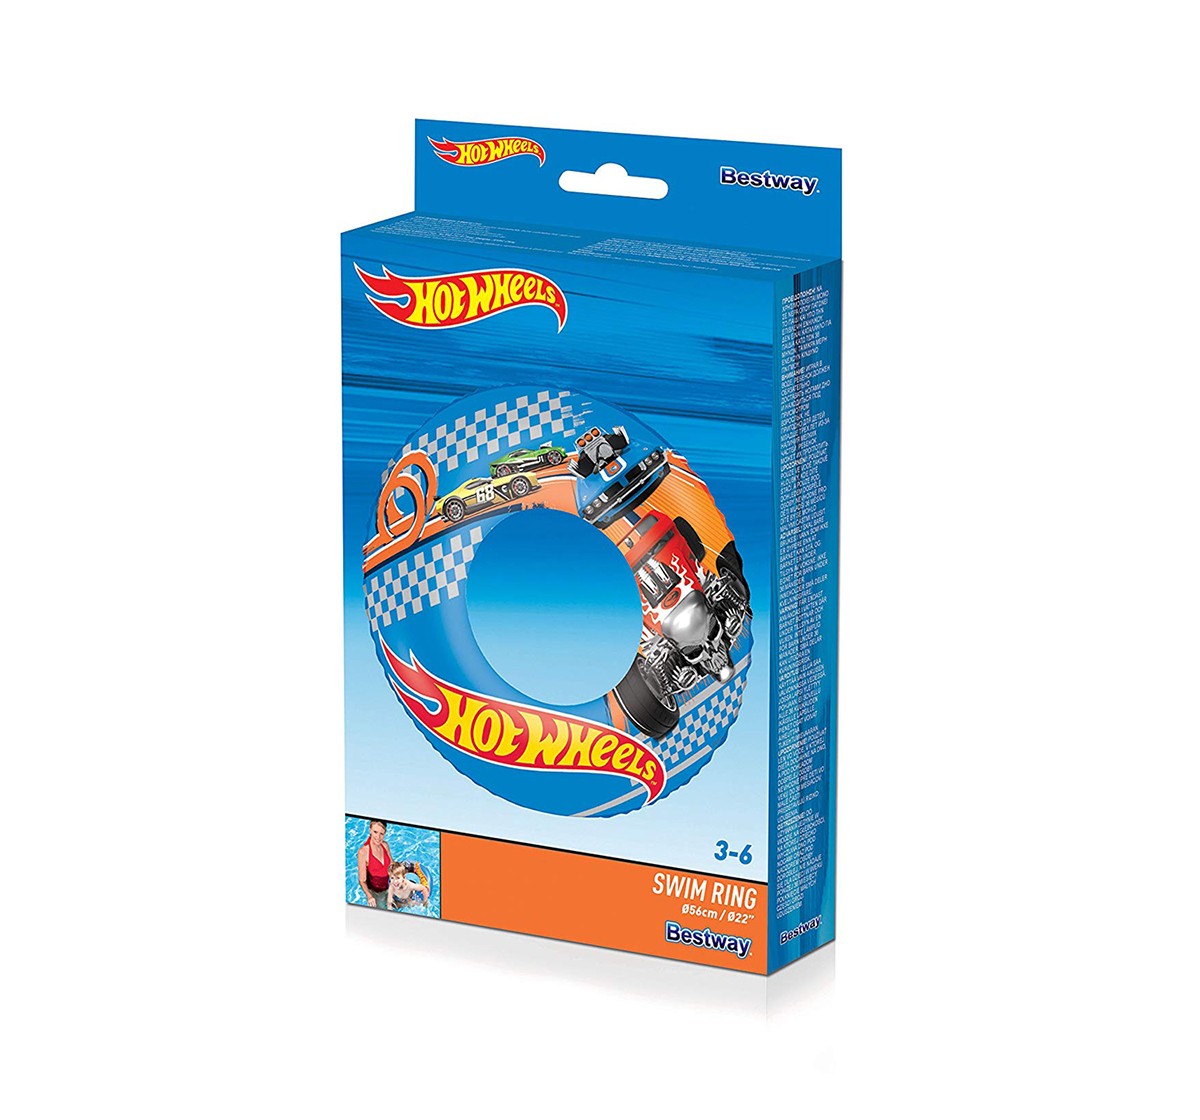 Bestway Hot Wheels Swim Ring | Baby Swim Float | Swim Ring 56Cm | Age 3 To 6 Years -Multi Color Outdoor Leisure for Kids age 3Y+ 